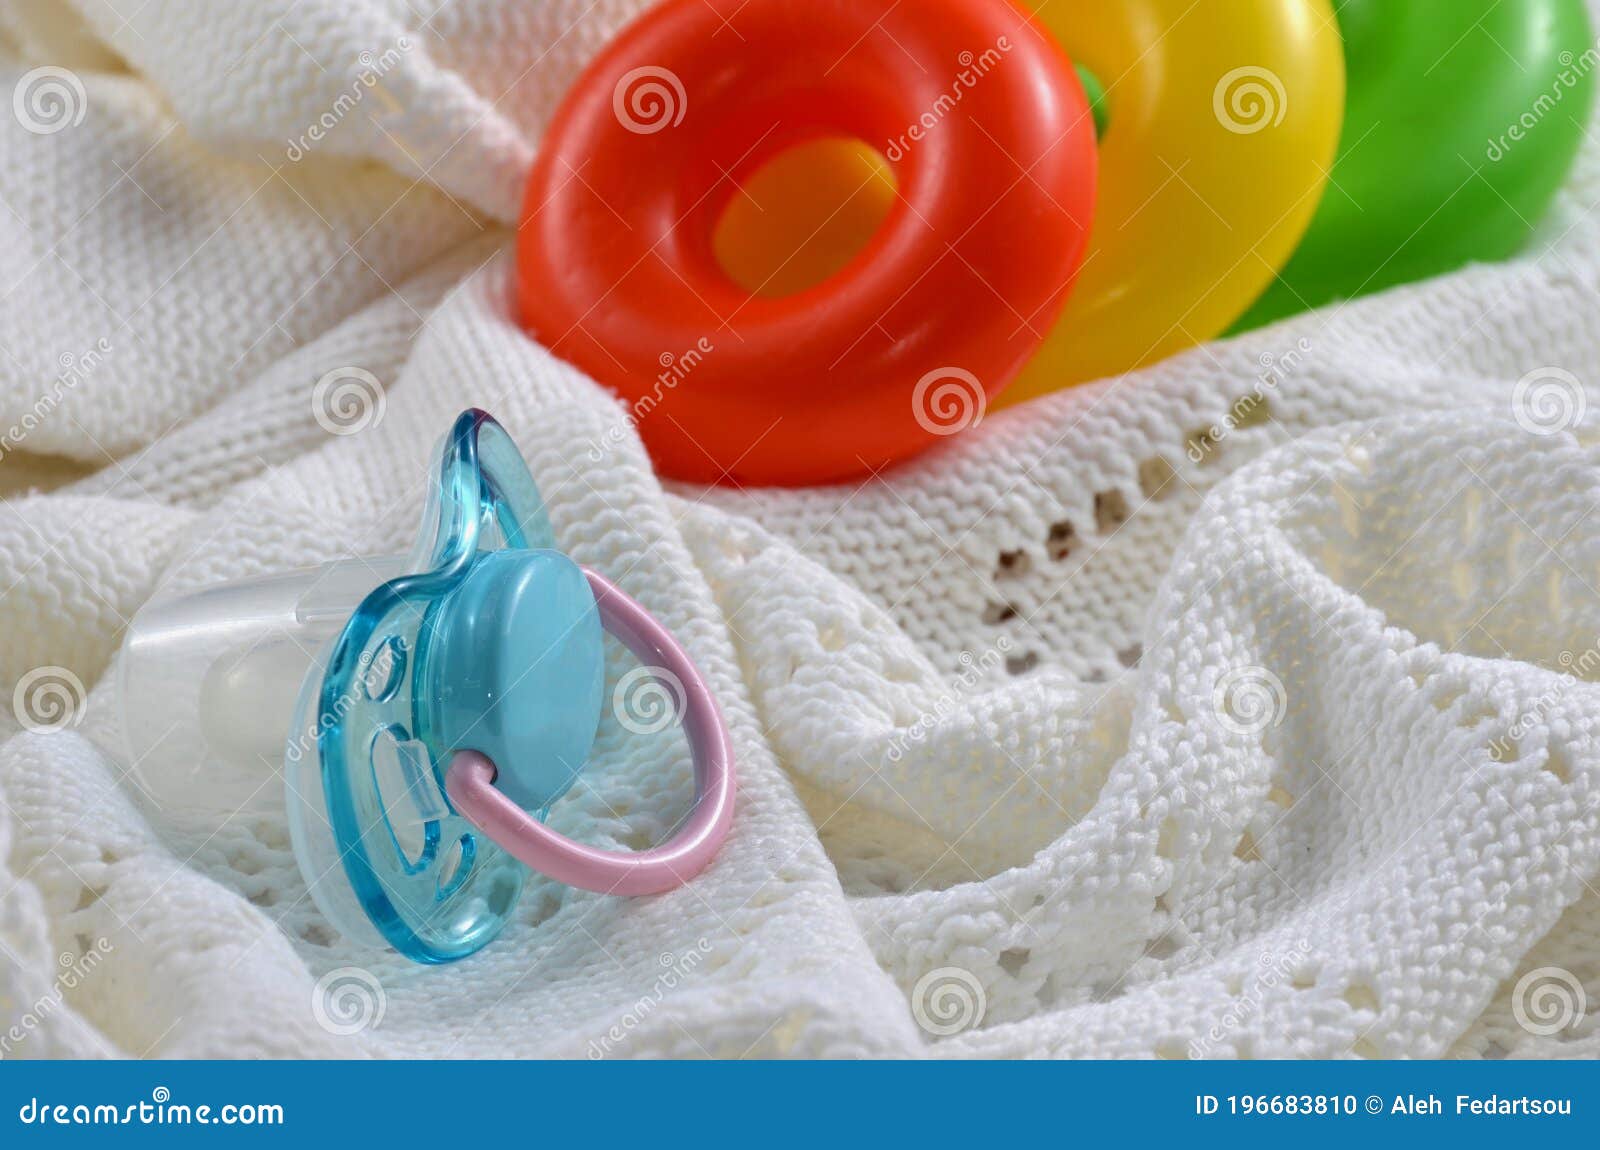 Baby Pacifier and Toys on the Blanket Stock Photo - Image of toys, bath ...